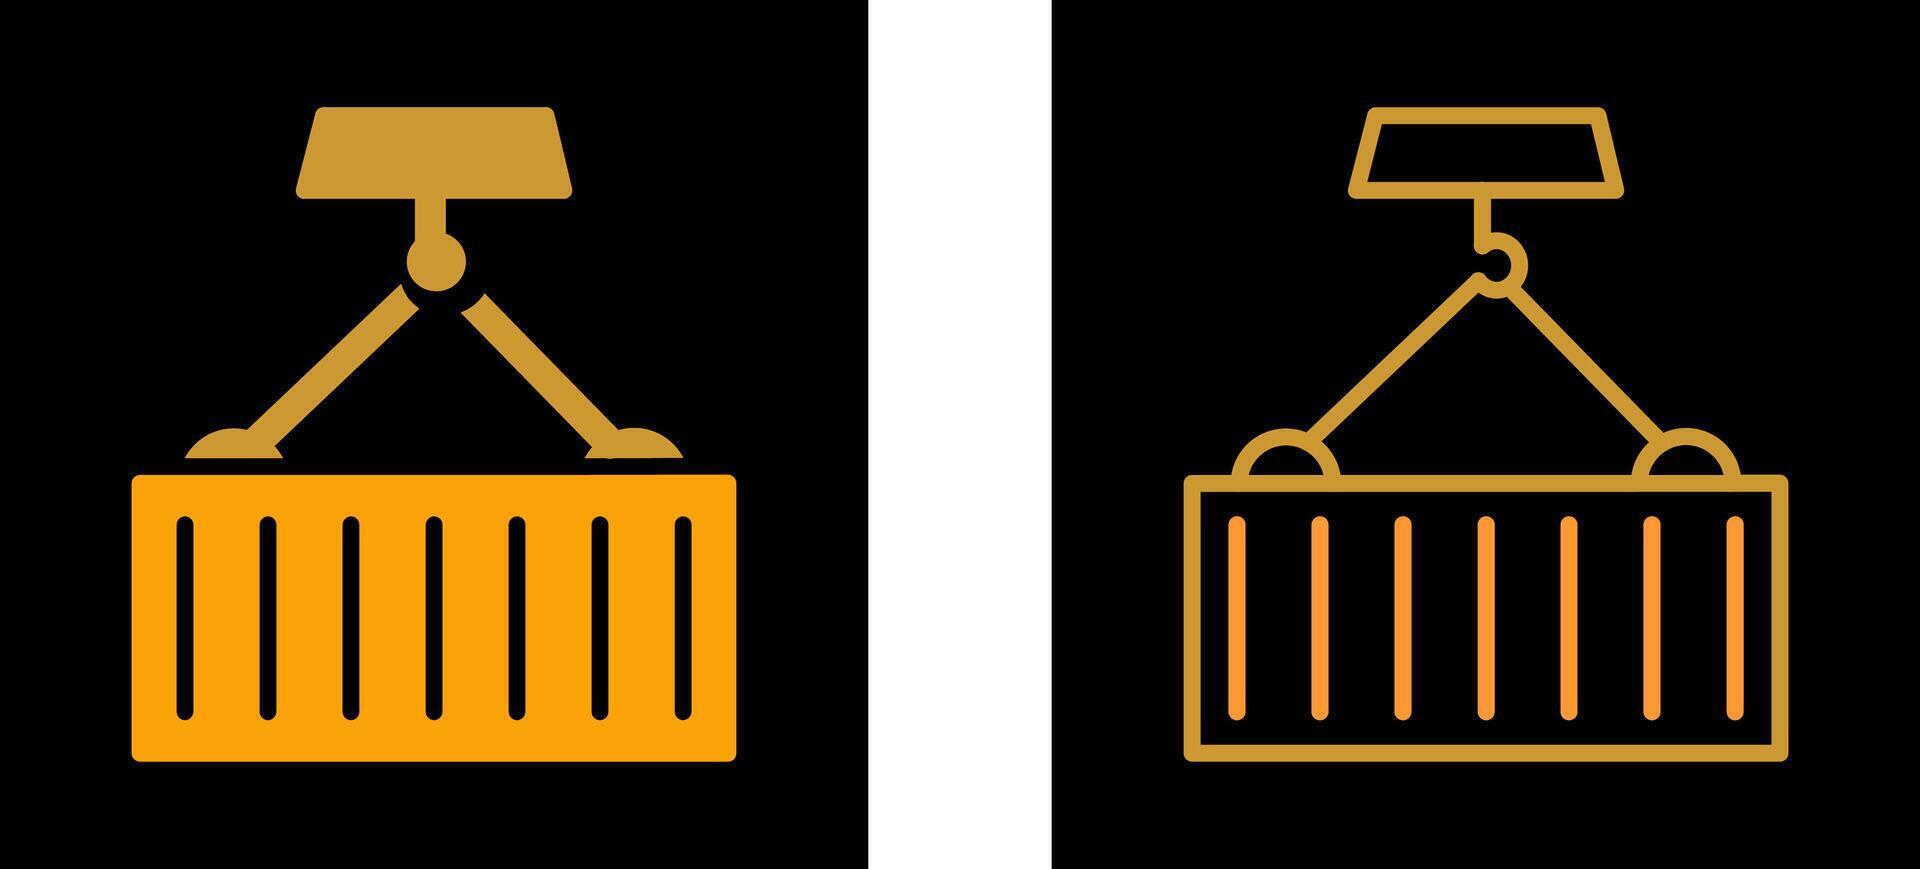 container vector pictogram